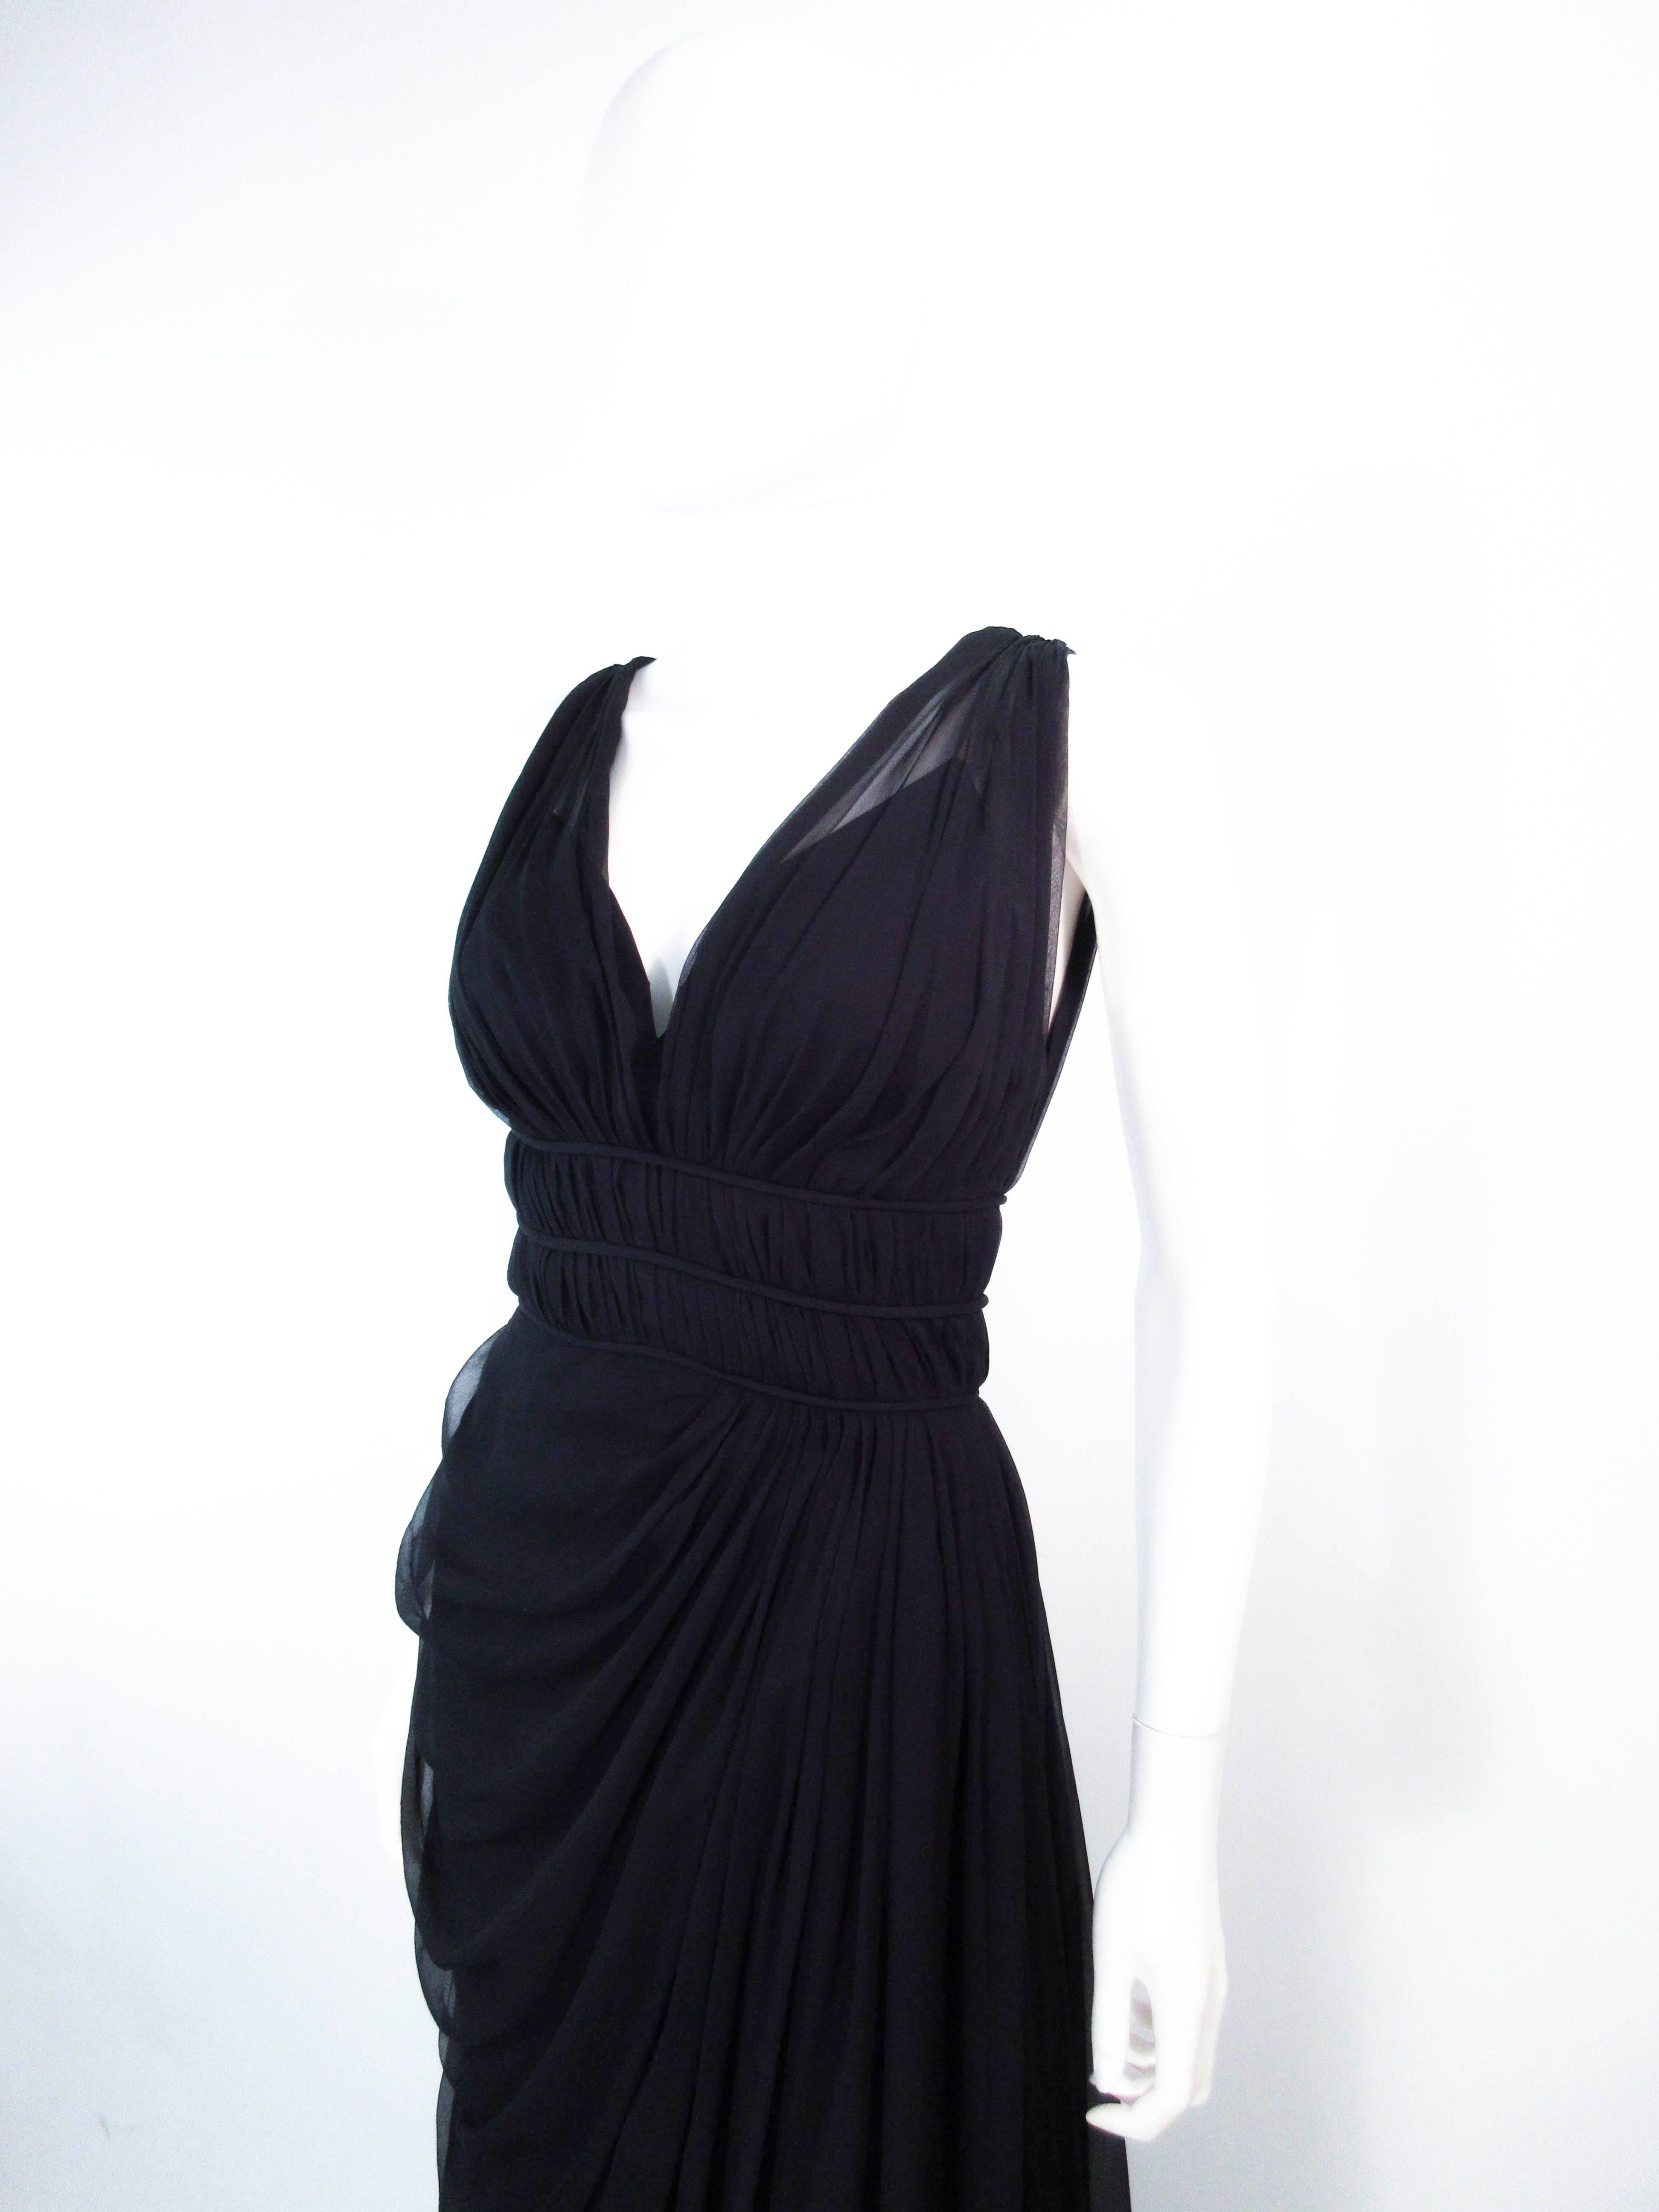 HELEN ROSE Black Silk Chiffon Draped Gown with Empire Waist Size 2 4 In Excellent Condition For Sale In Los Angeles, CA